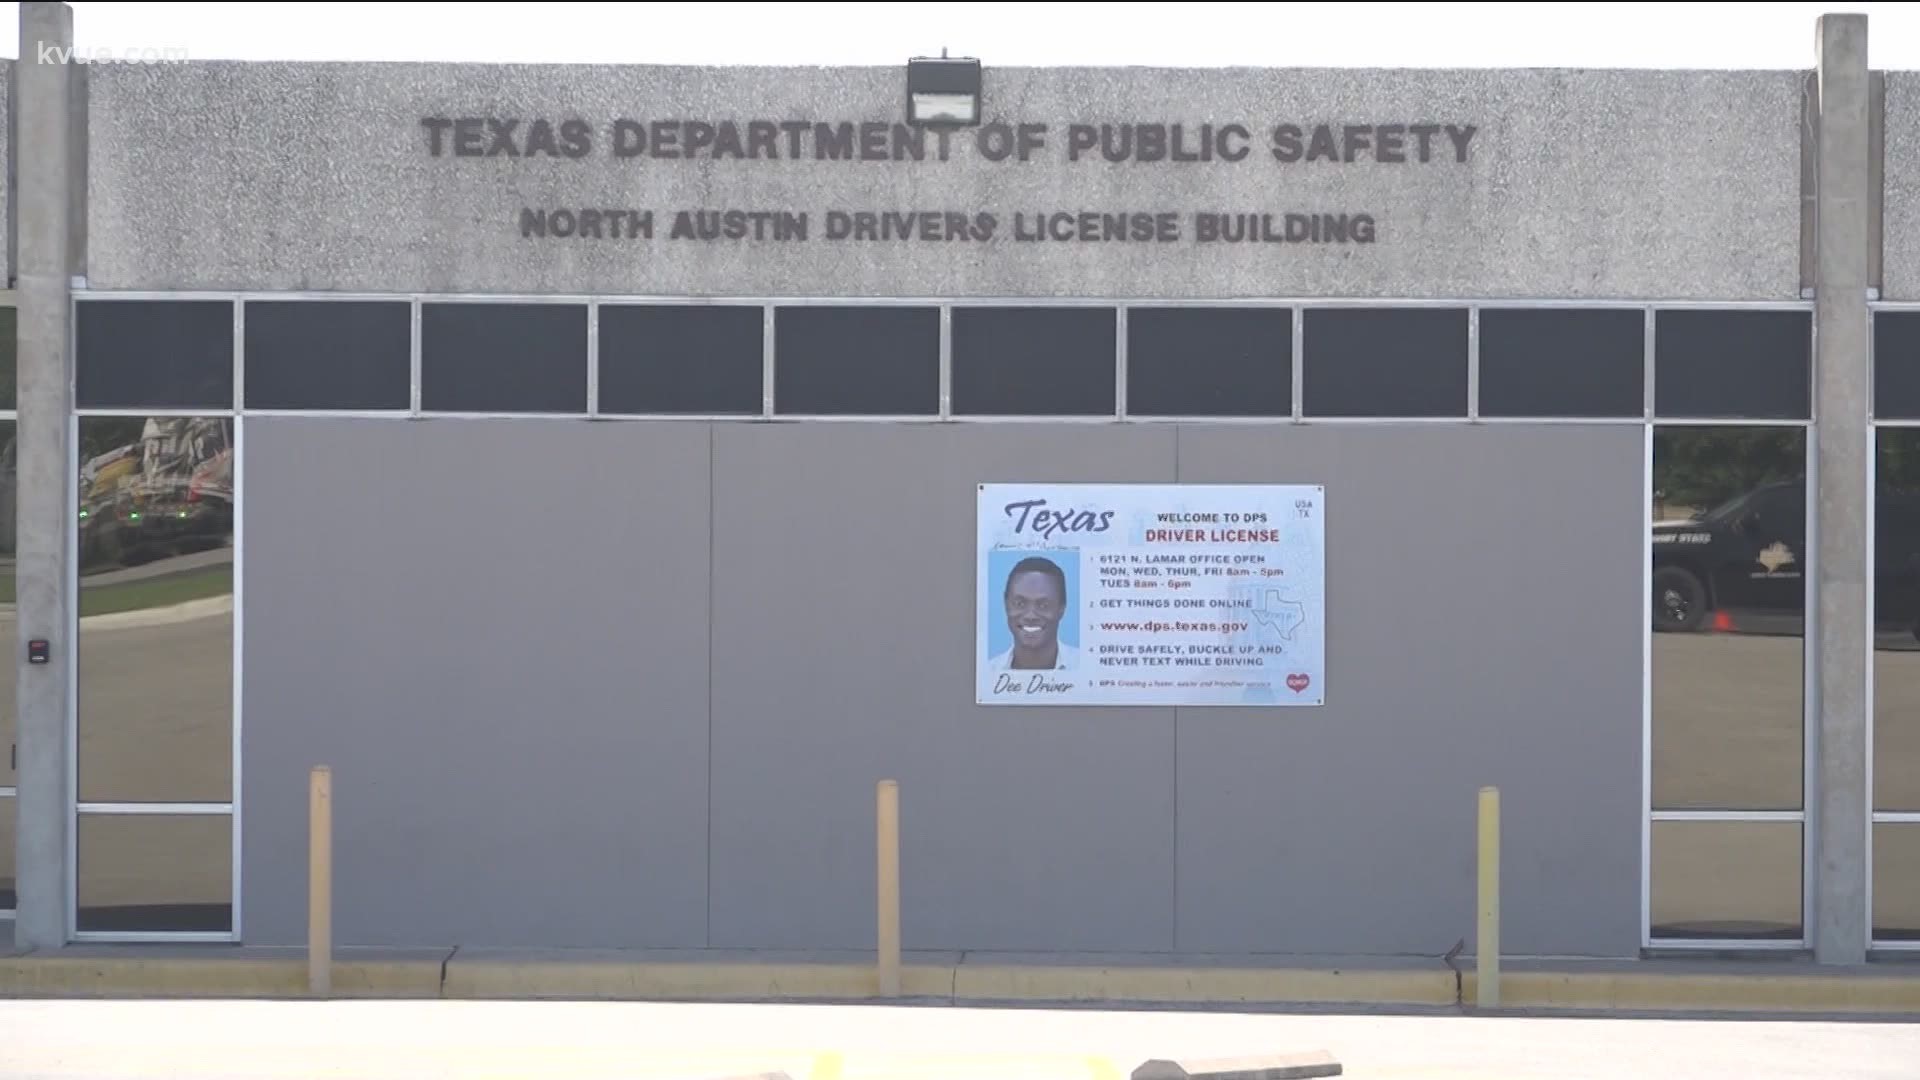 Gov. Abbott announced the Department of Public Safety (DPS) Driver License offices will open in Central Texas on Friday. However, some viewers ran into questions.